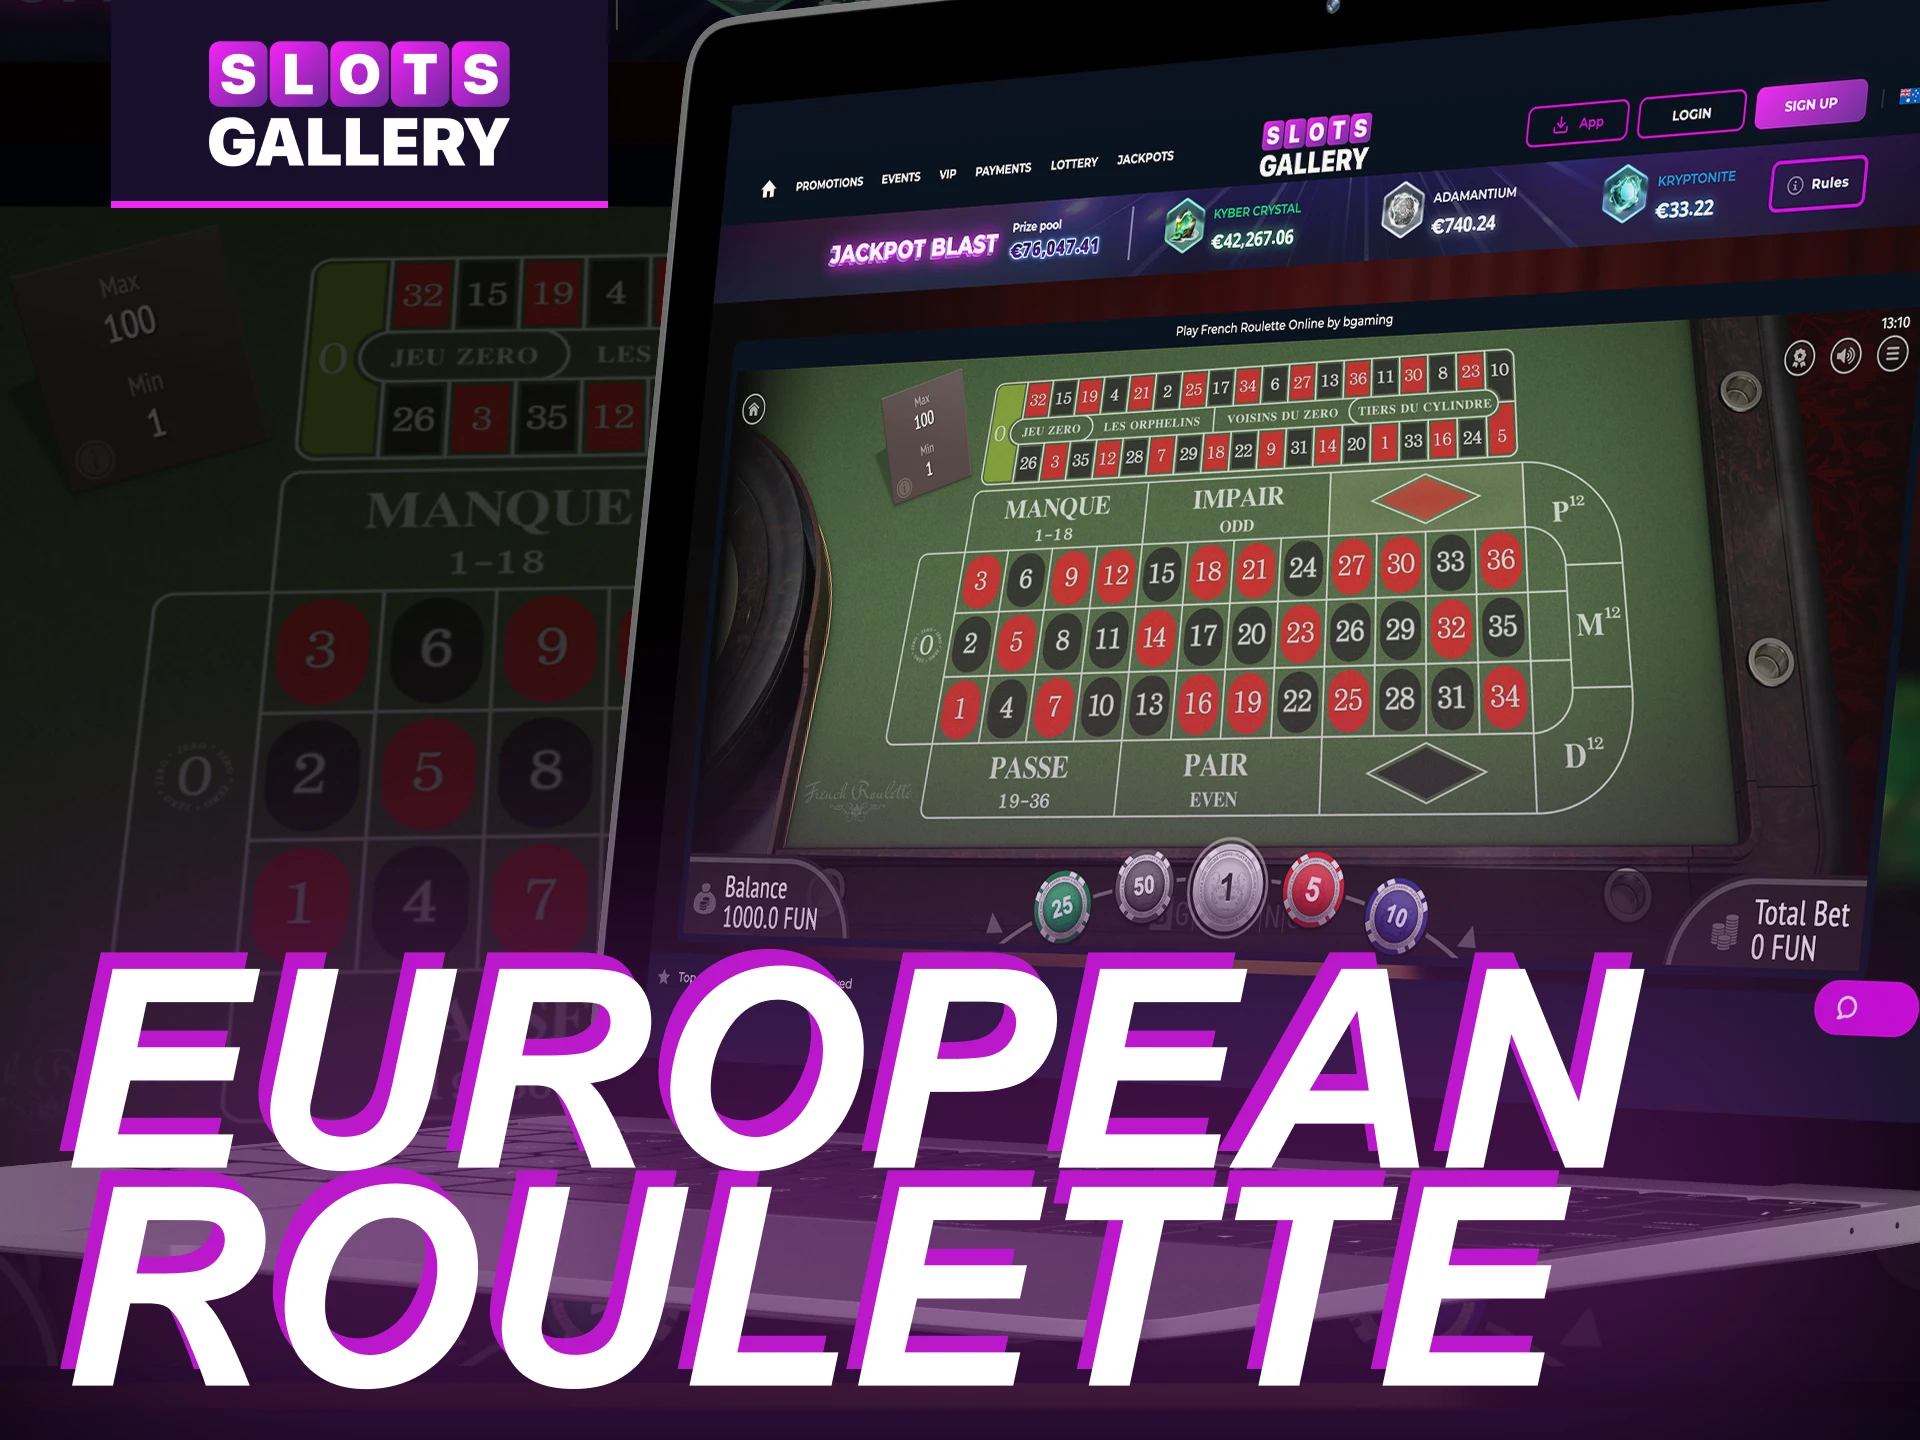 How to play European roulette at Slots Gallery online casino.